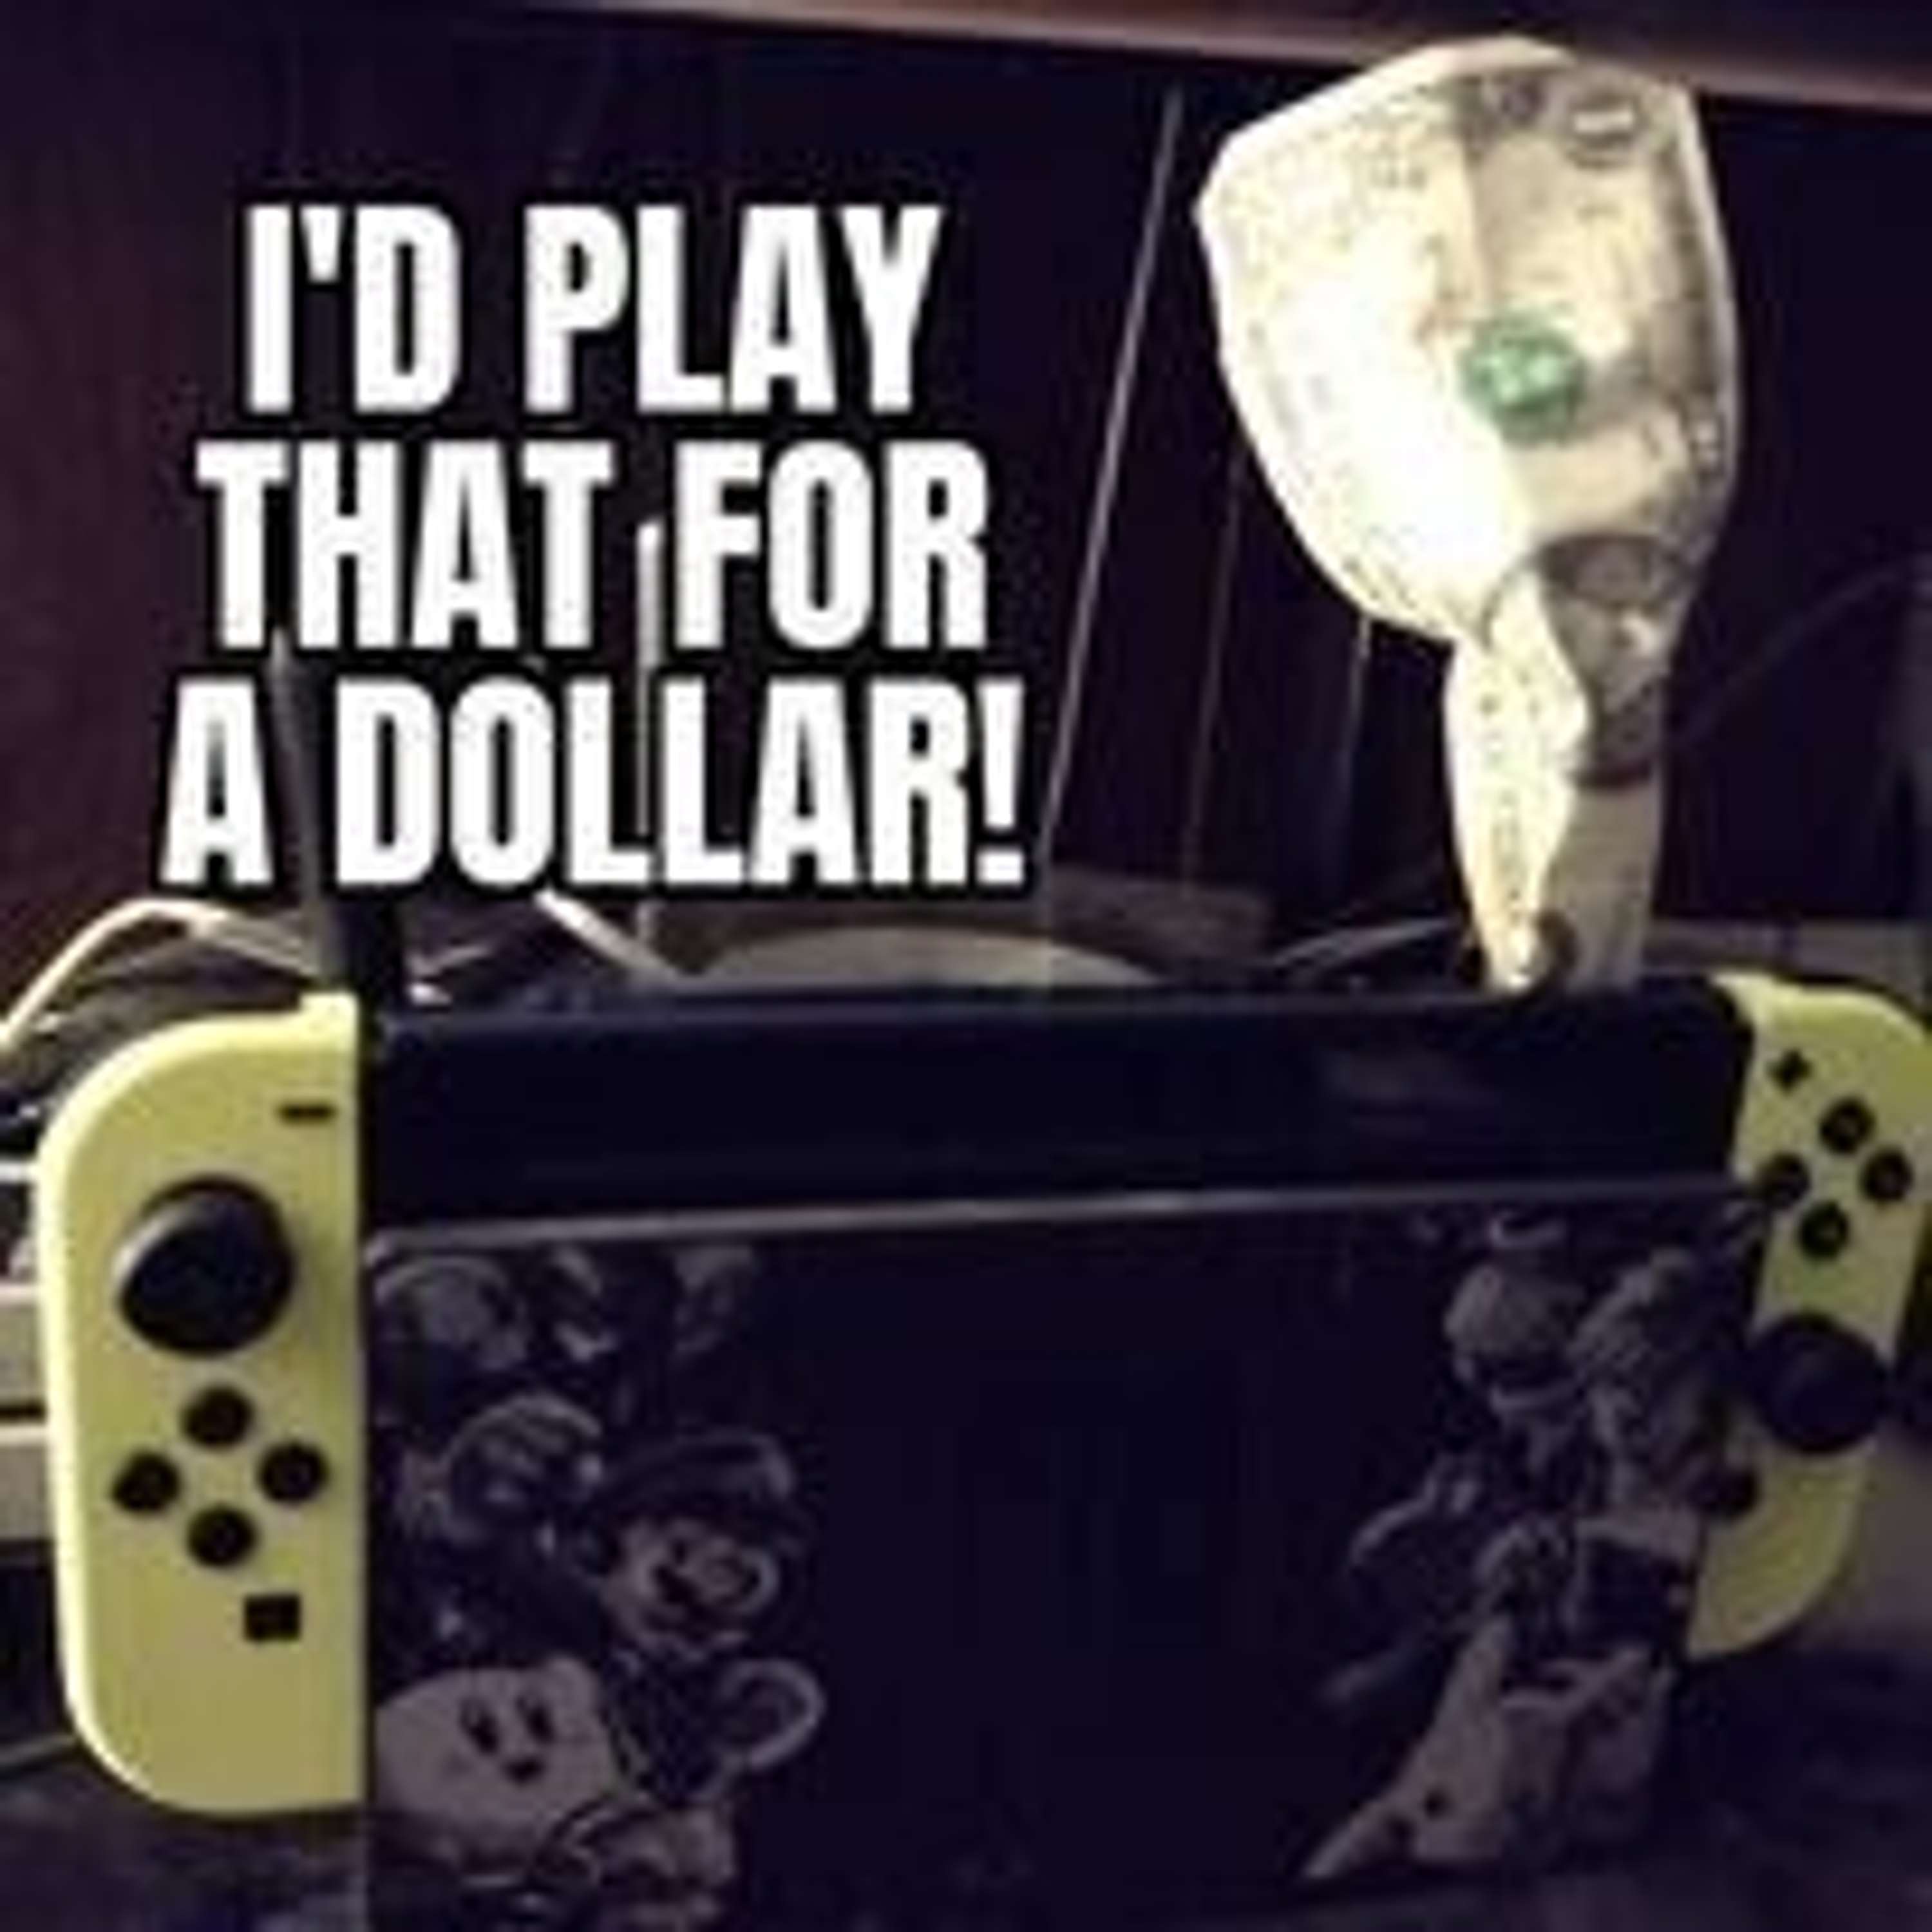 I‘d Play That For A Dollar: Six Pence